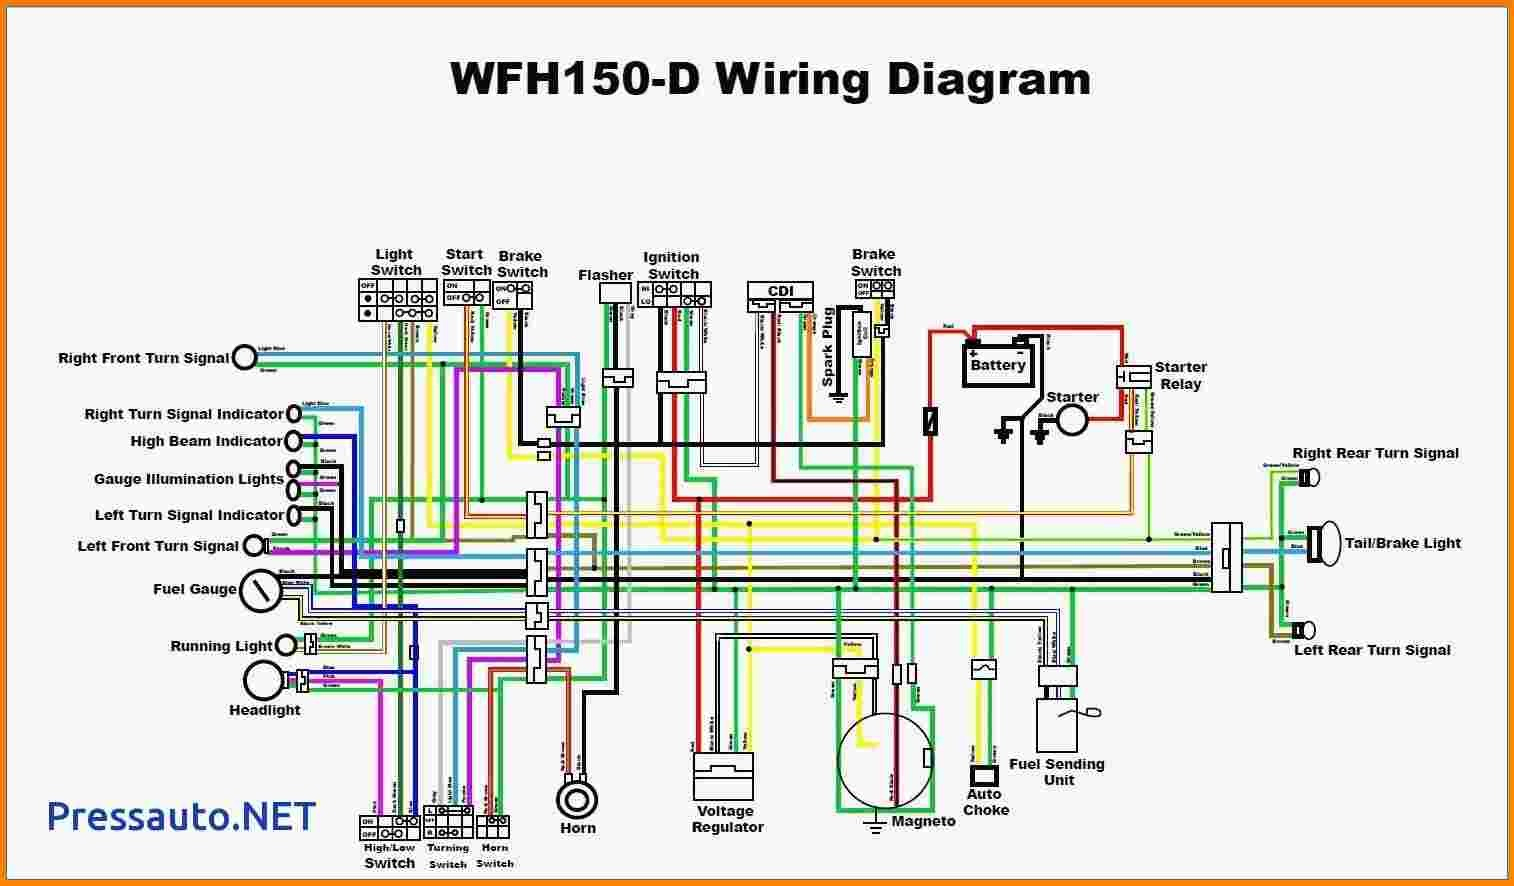 Wiring Harness For Chinese Atv - Wiring Diagram Detailed - Chinese Atv Wiring Diagram 110